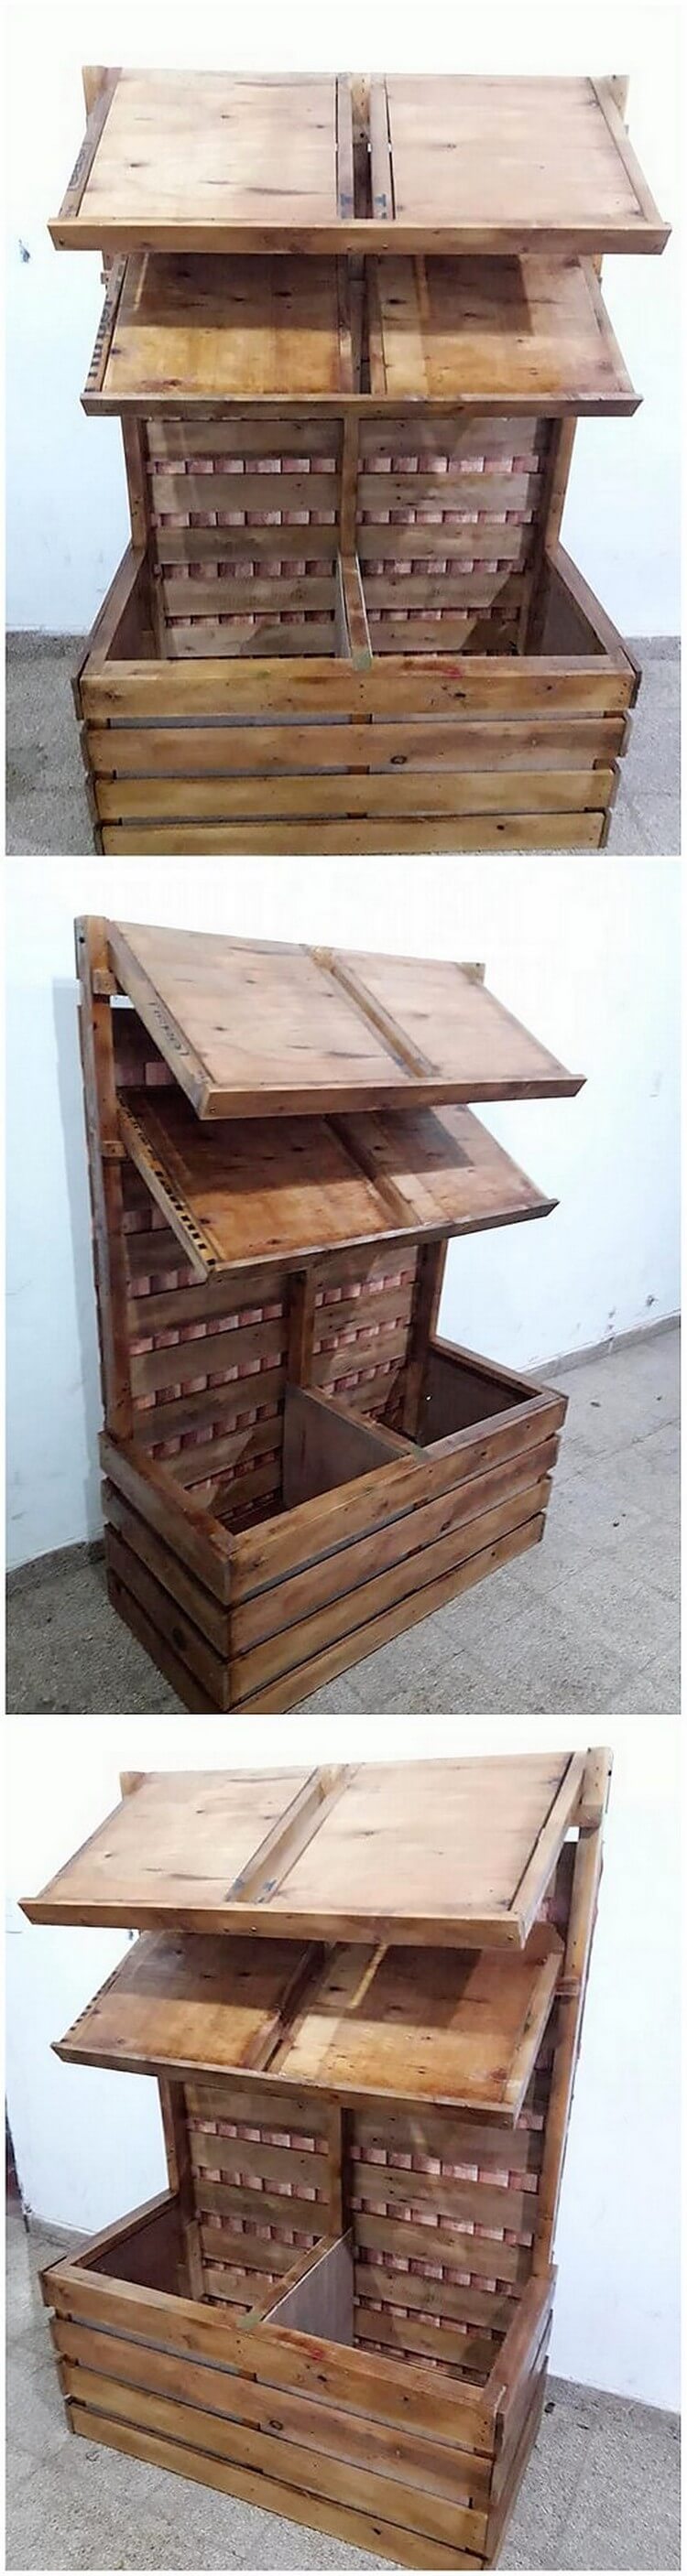 Perfect Pallet Ideas And Projects That Are Easy To Make And Sell Pallet Wood Projects